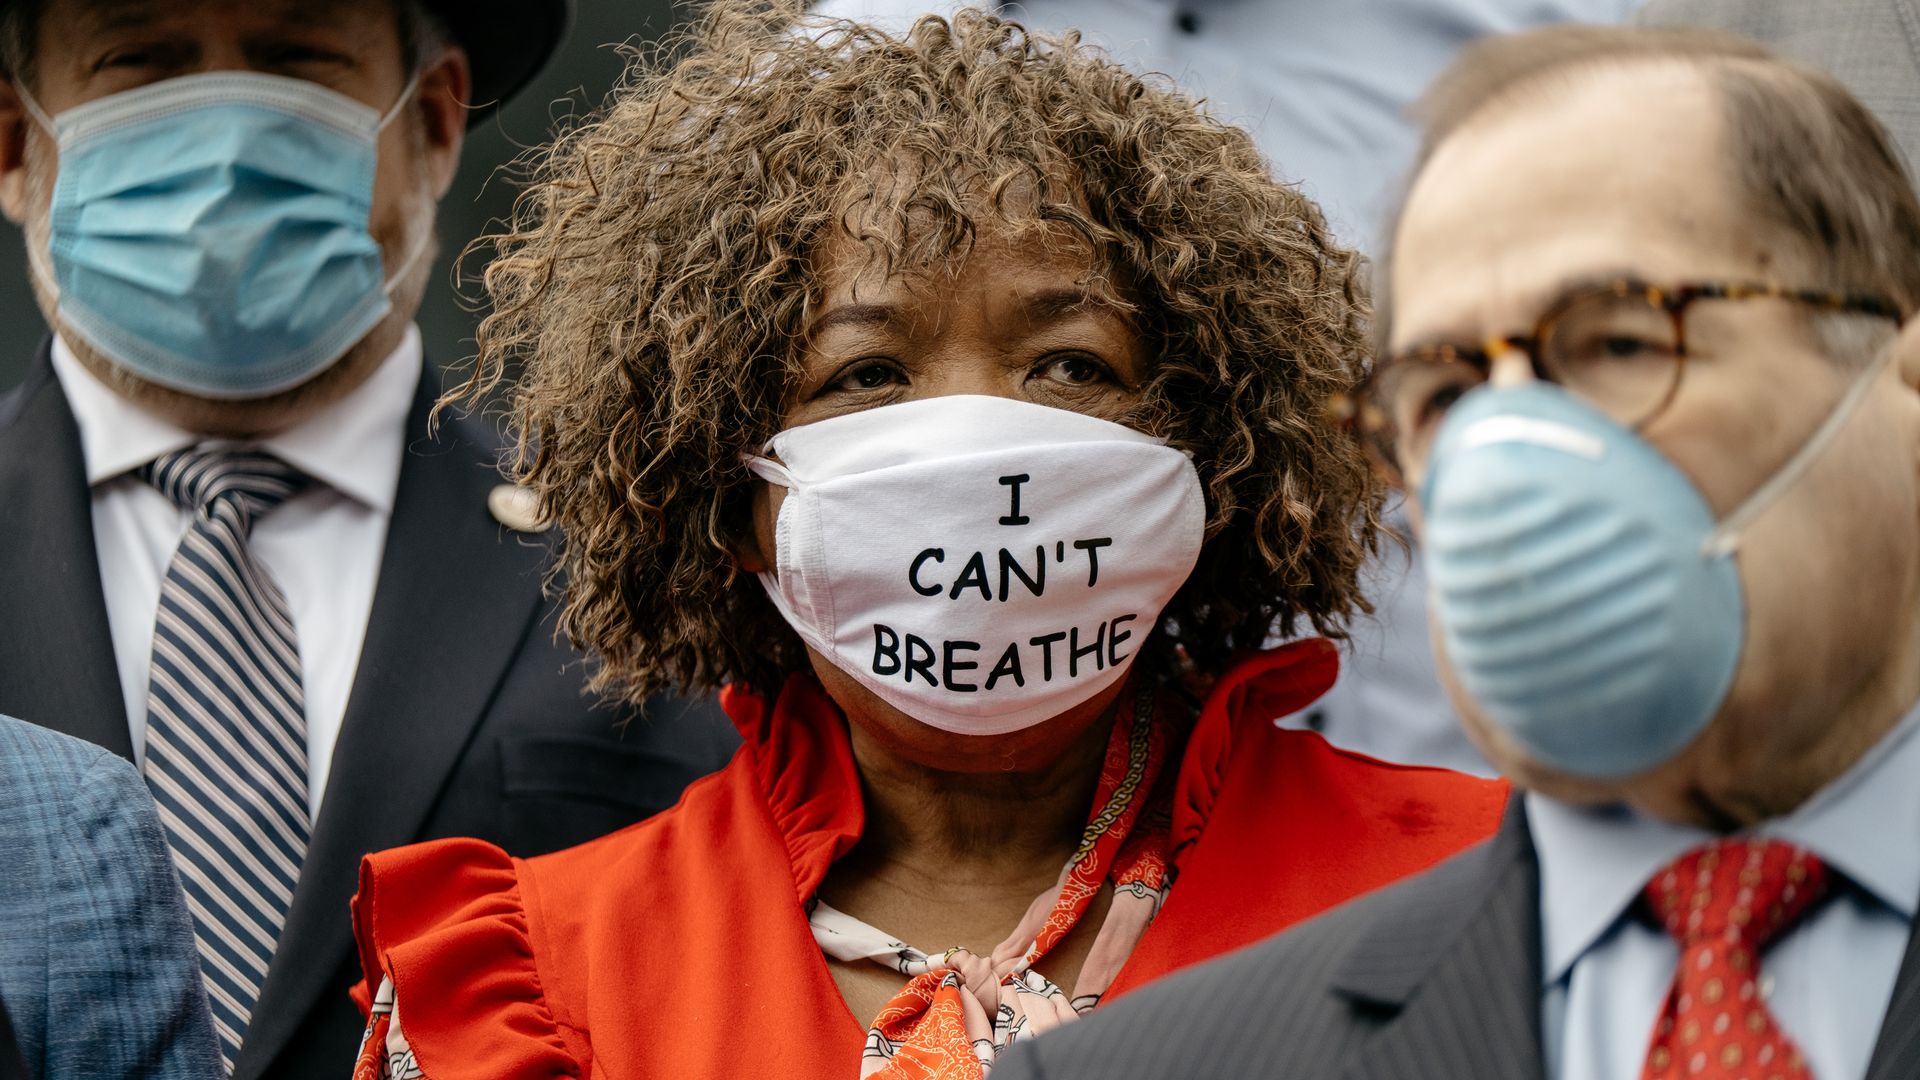 Eric Garner's mother wears a face mask with the words "I can't breathe" printed on it